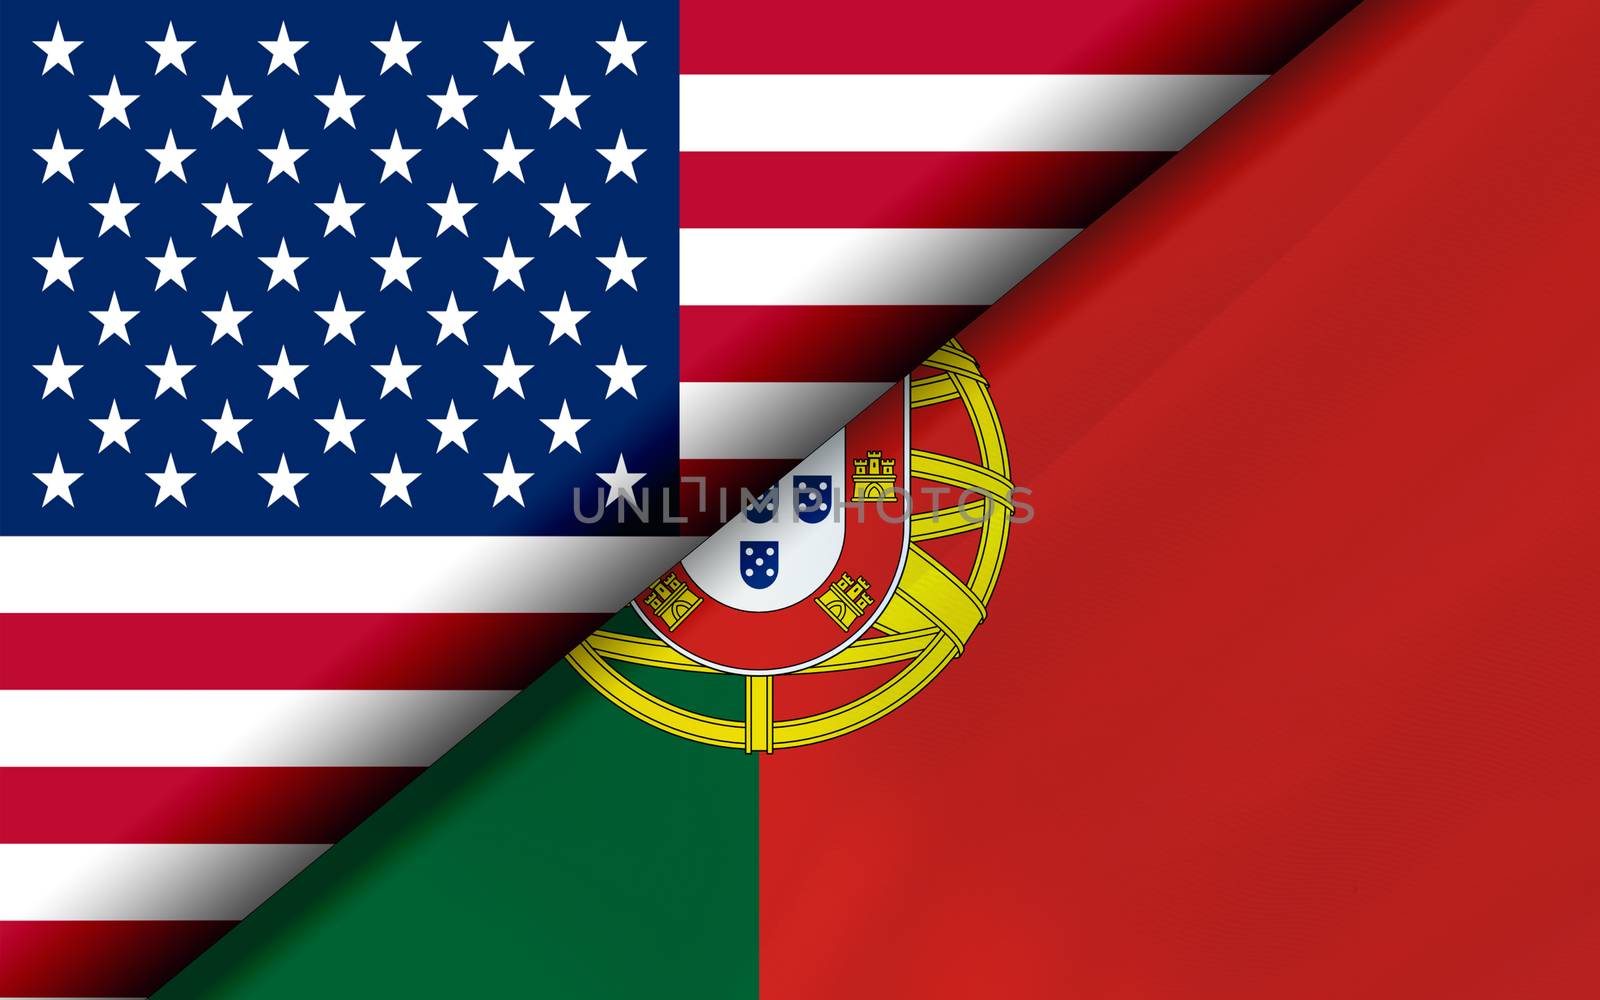 Flags of the USA and Portugal divided diagonally. 3D rendering